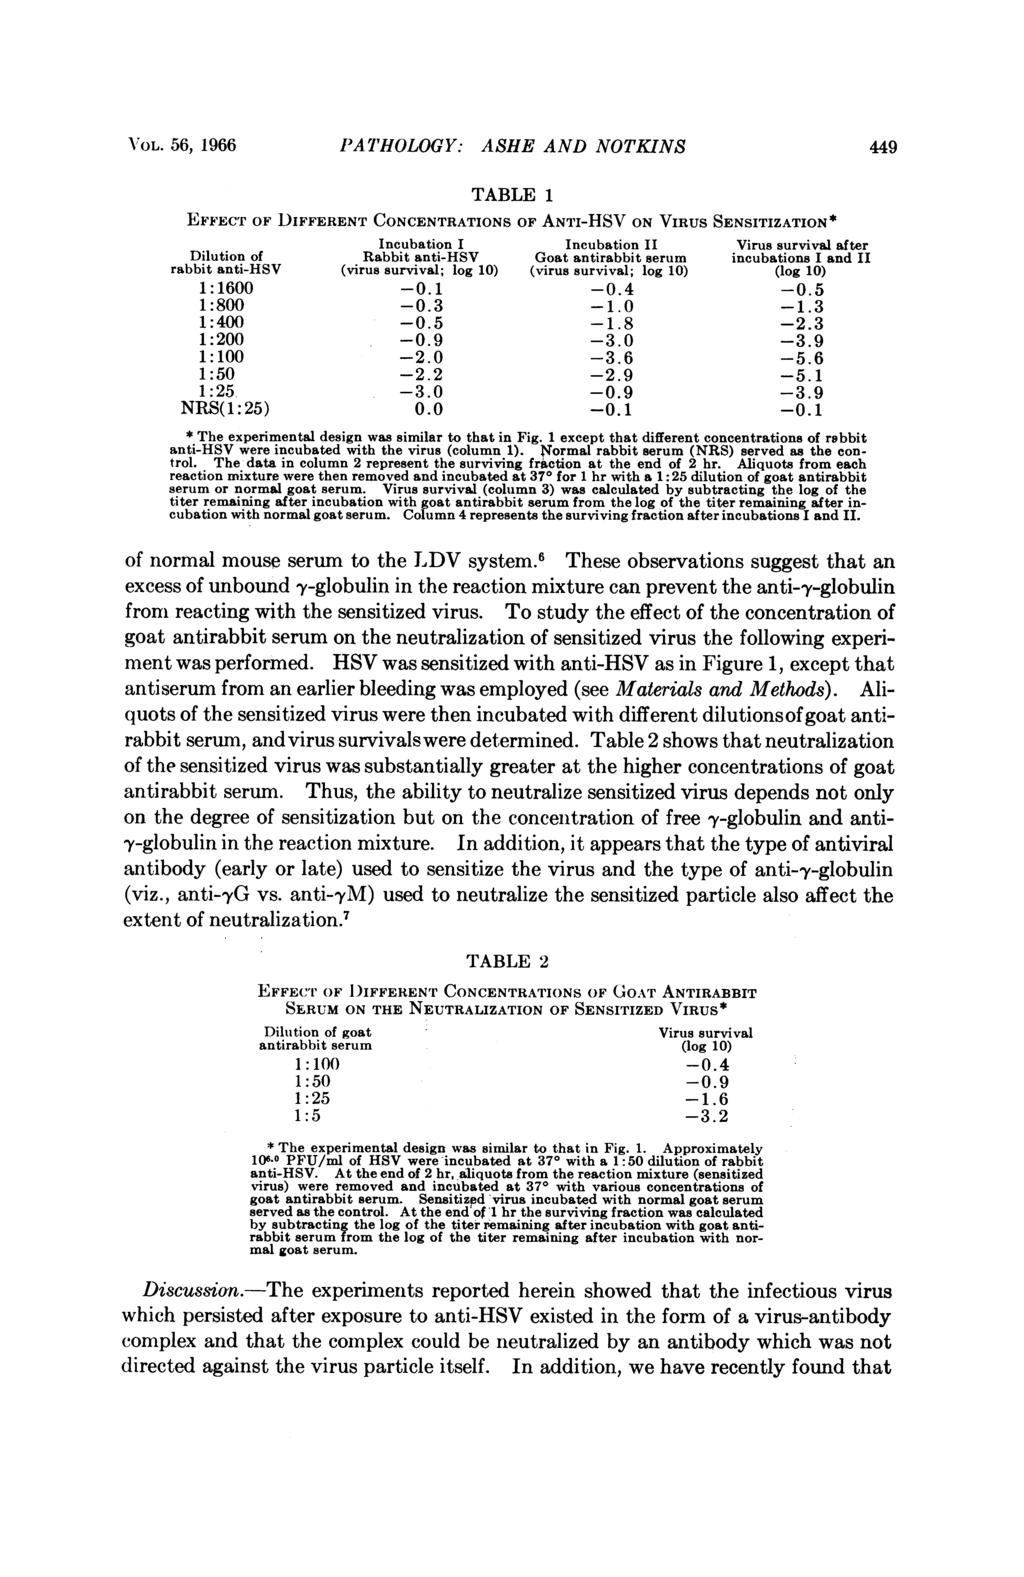 NIOL. 56, 1966 PATHOLOGY: ASHE AND NOTKINS 449 TABLE 1 EFFECT OF DIFFERENT CONCENTRATIONS OF ANTI-HSV ON VIRUS SENSITIZATION* Incubation I Incubation II Virus survival after Dilution of Rabbit